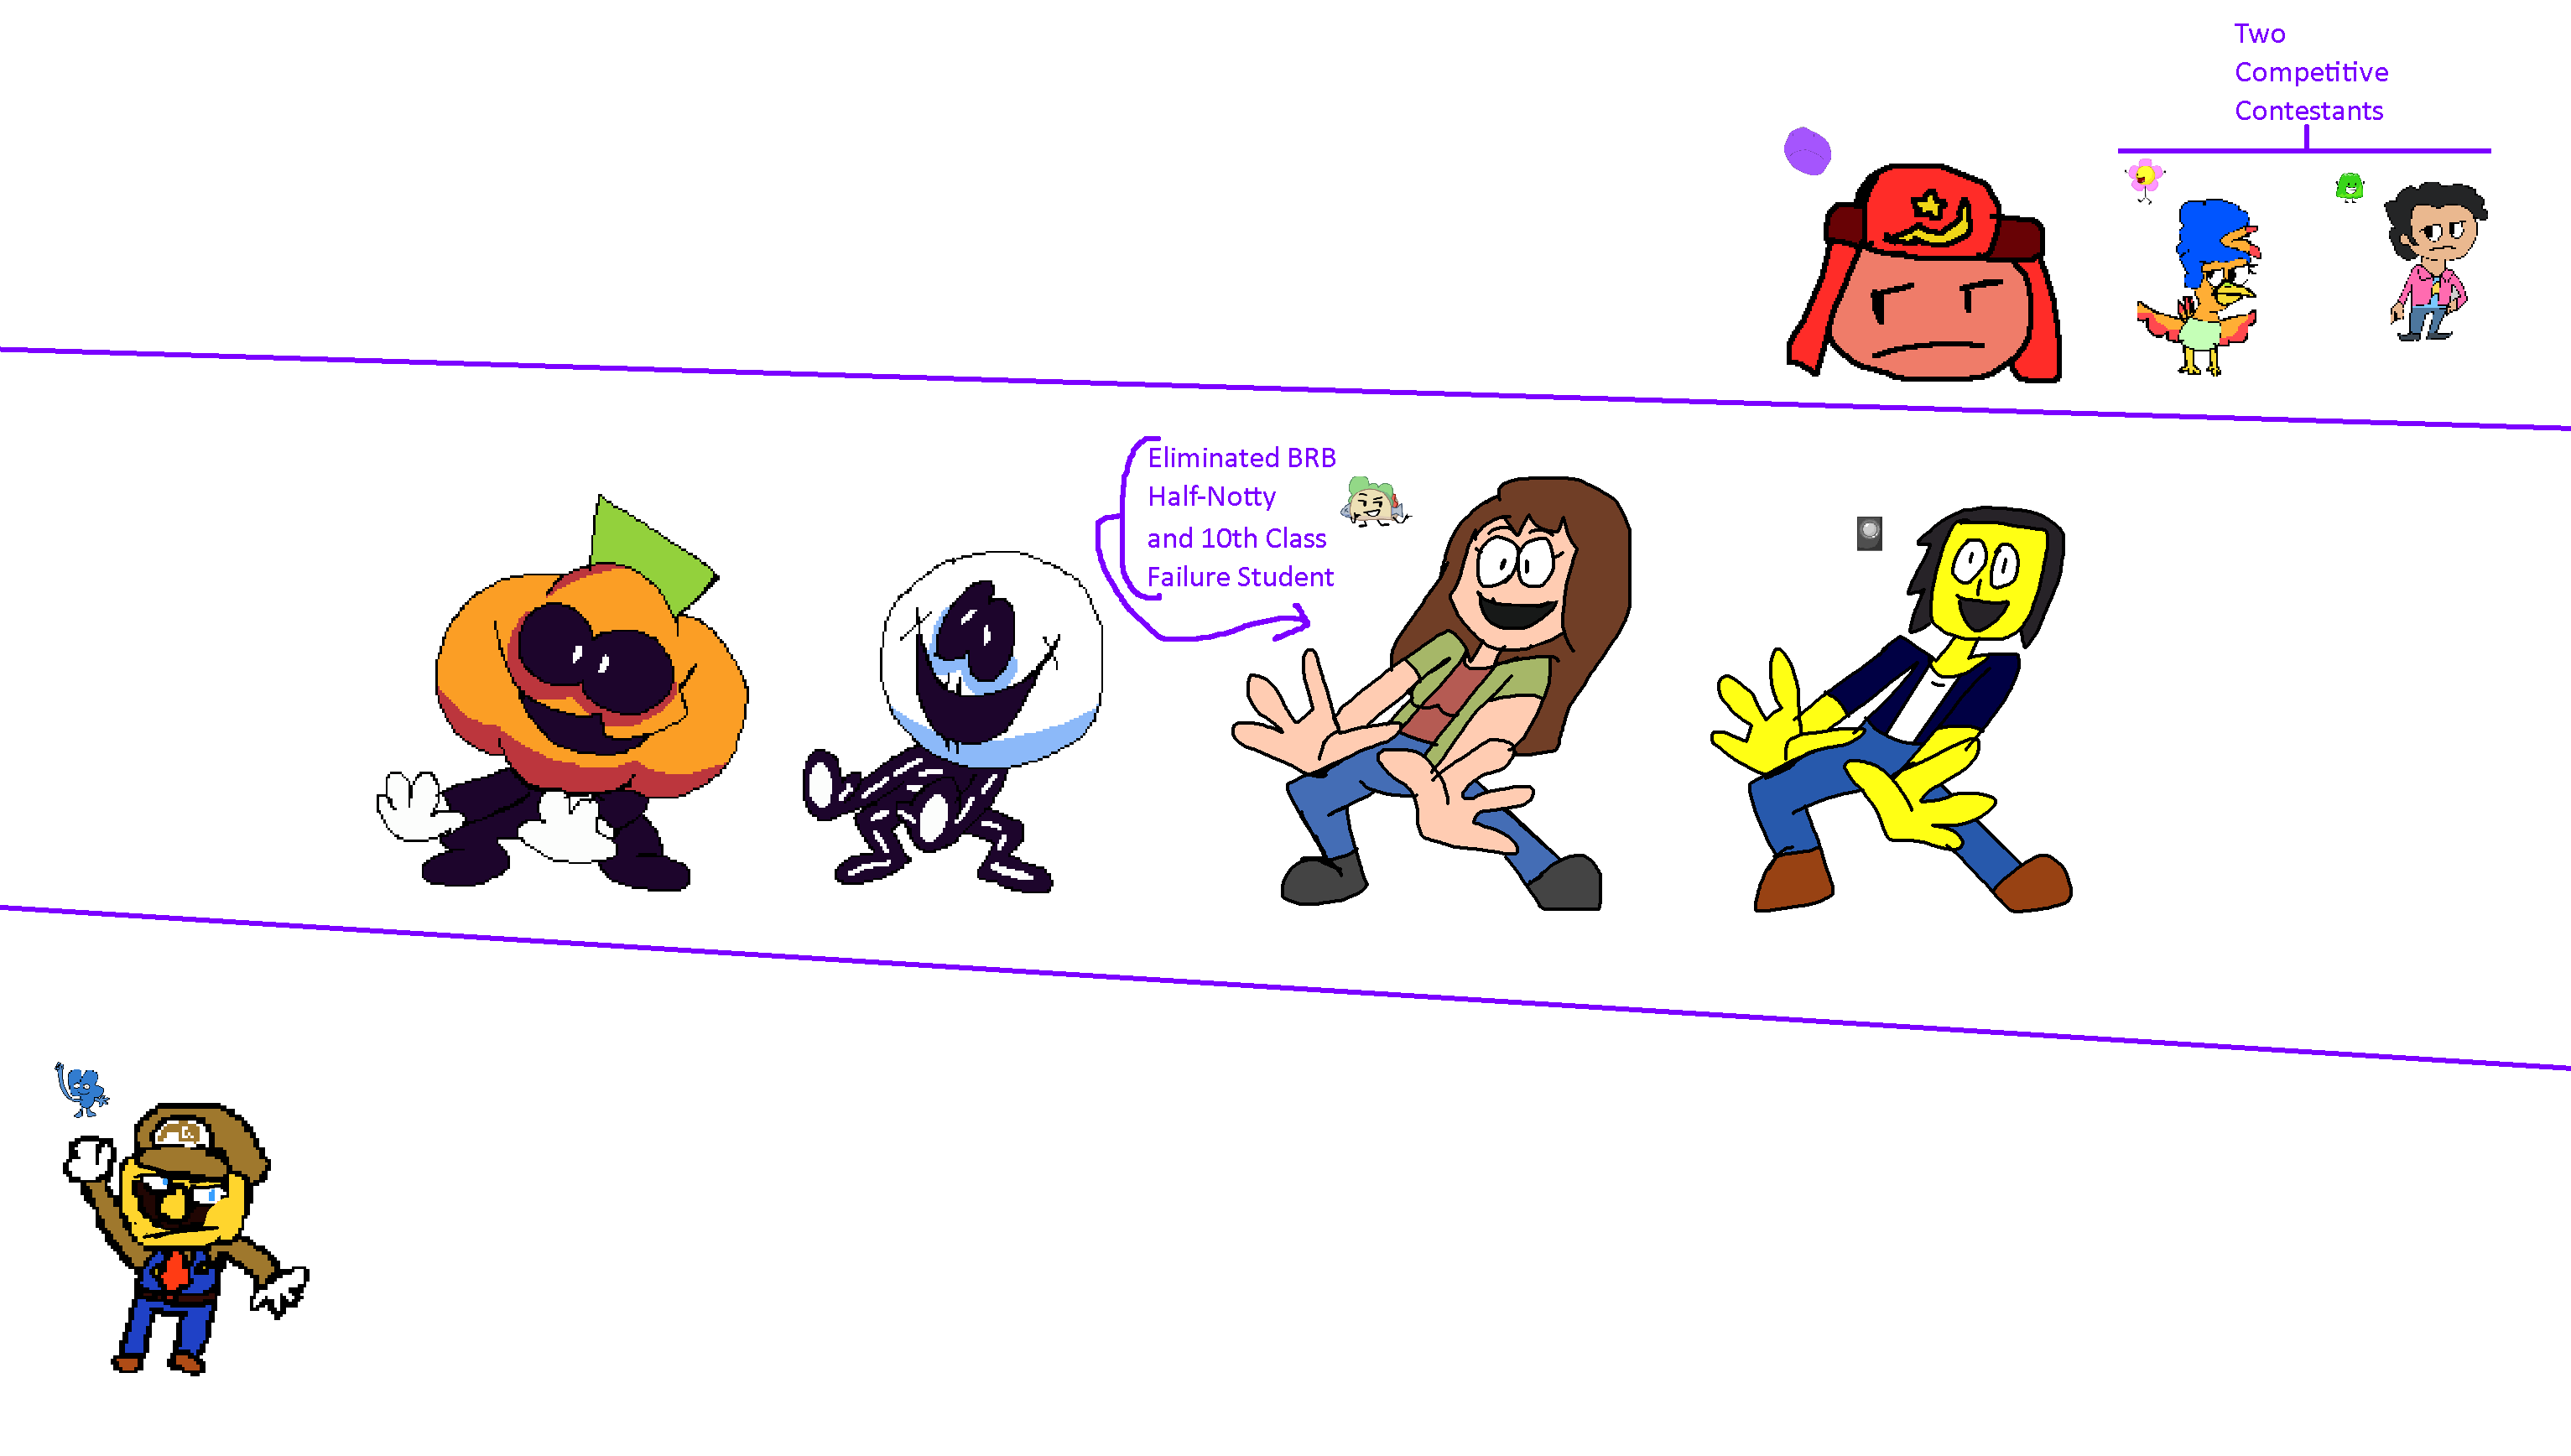 The Ultimate Sr Pelo's Spooky Month Styled Cast an by Abbysek on